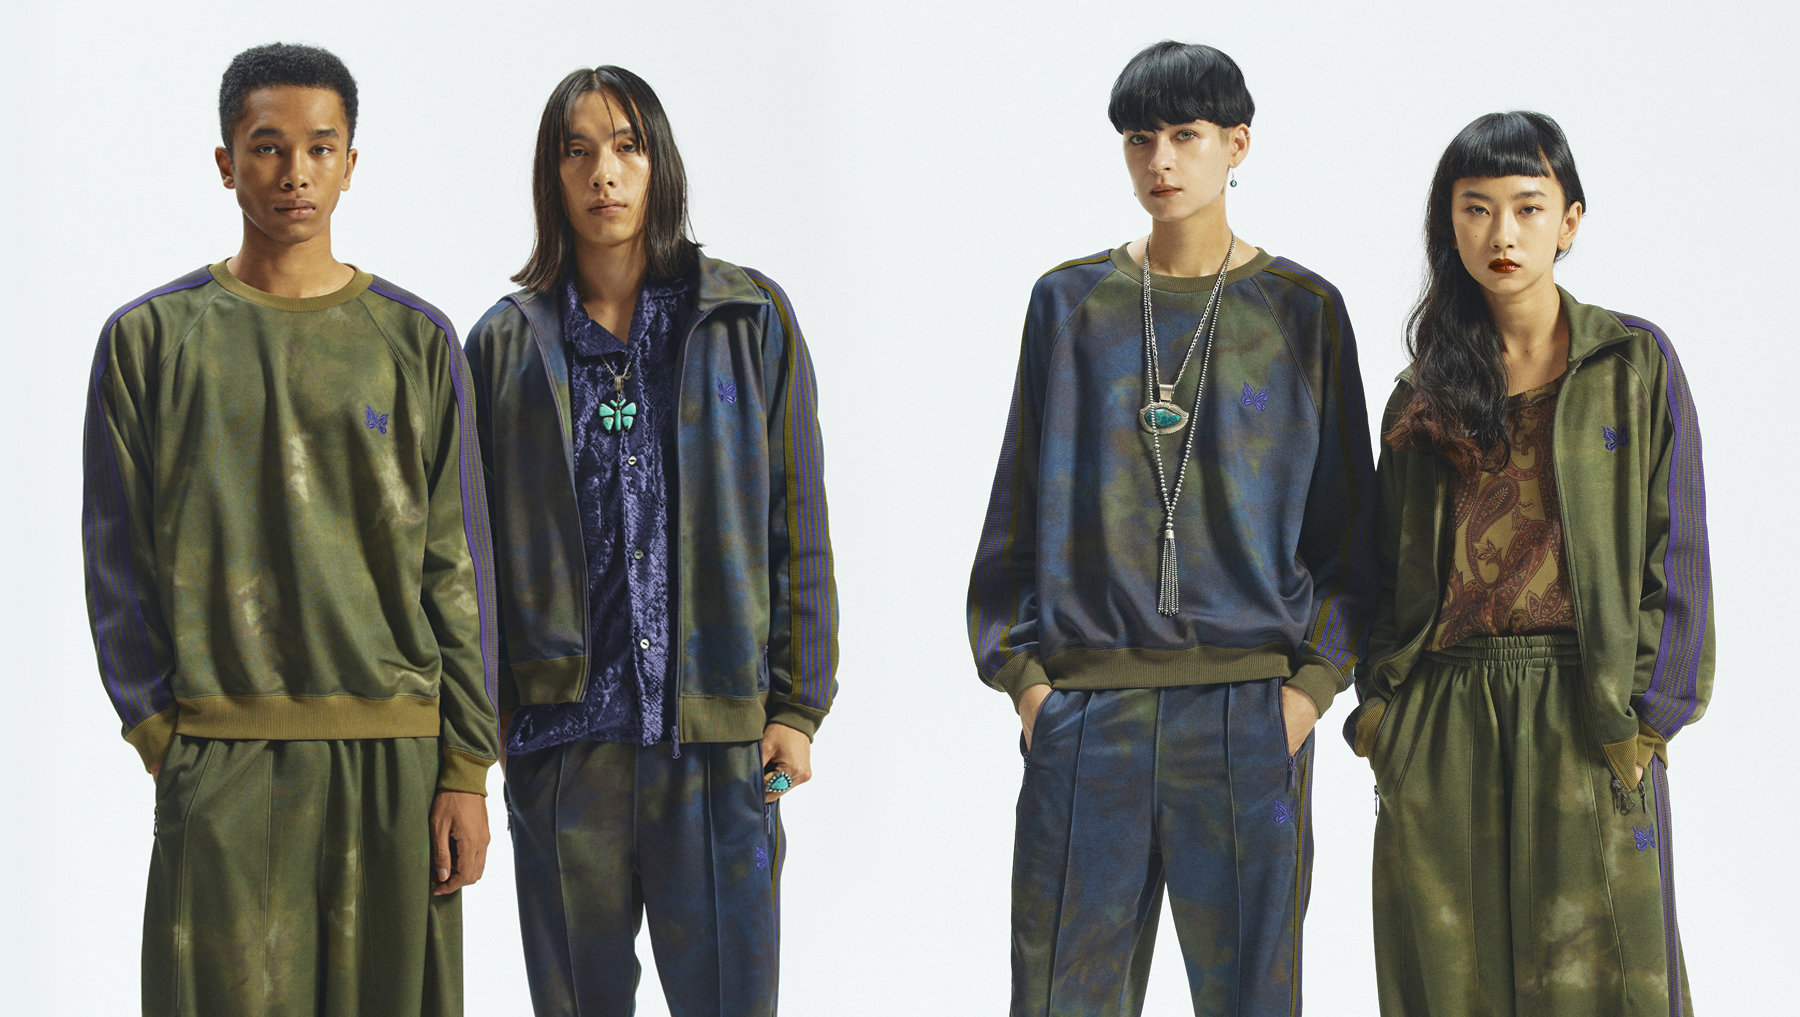 〈NEEDLES〉TRACK SUITS
PIRNTED UNEVEN DYE for NEPENTHES